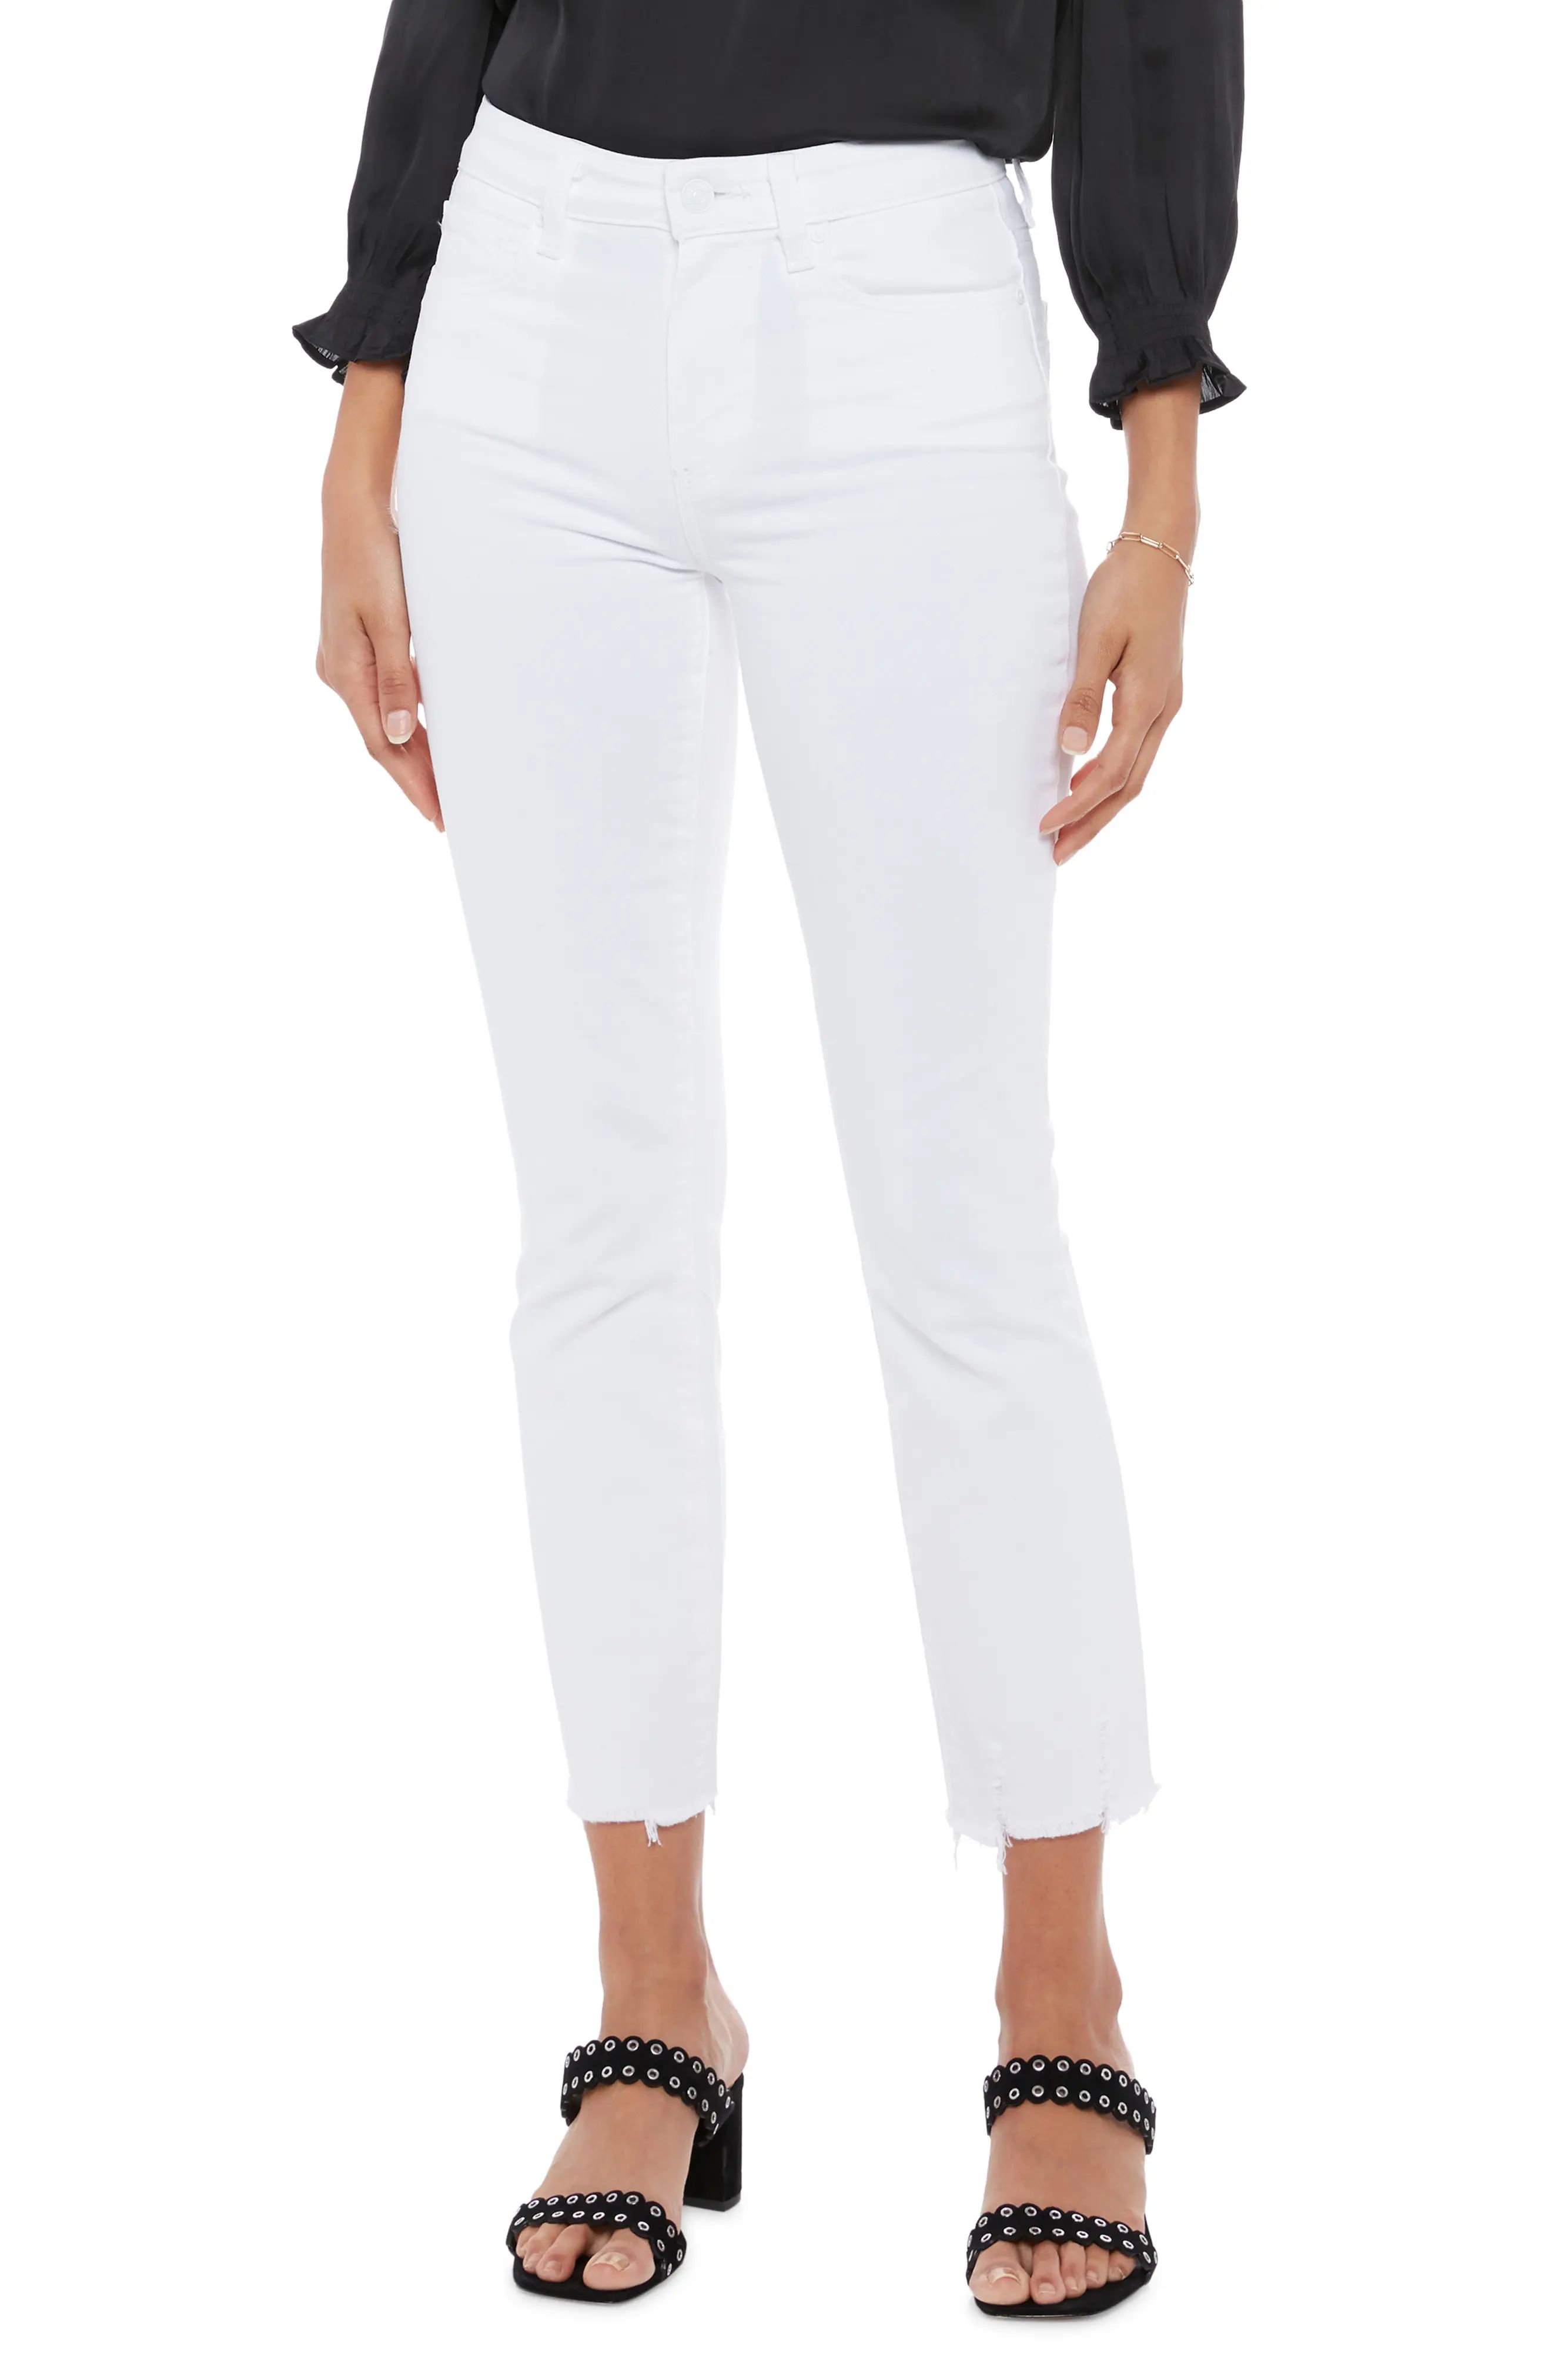 PAIGE Cindy High Waist Raw Hem Ankle Jeans in Crisp White at Nordstrom, Size 24 | Nordstrom